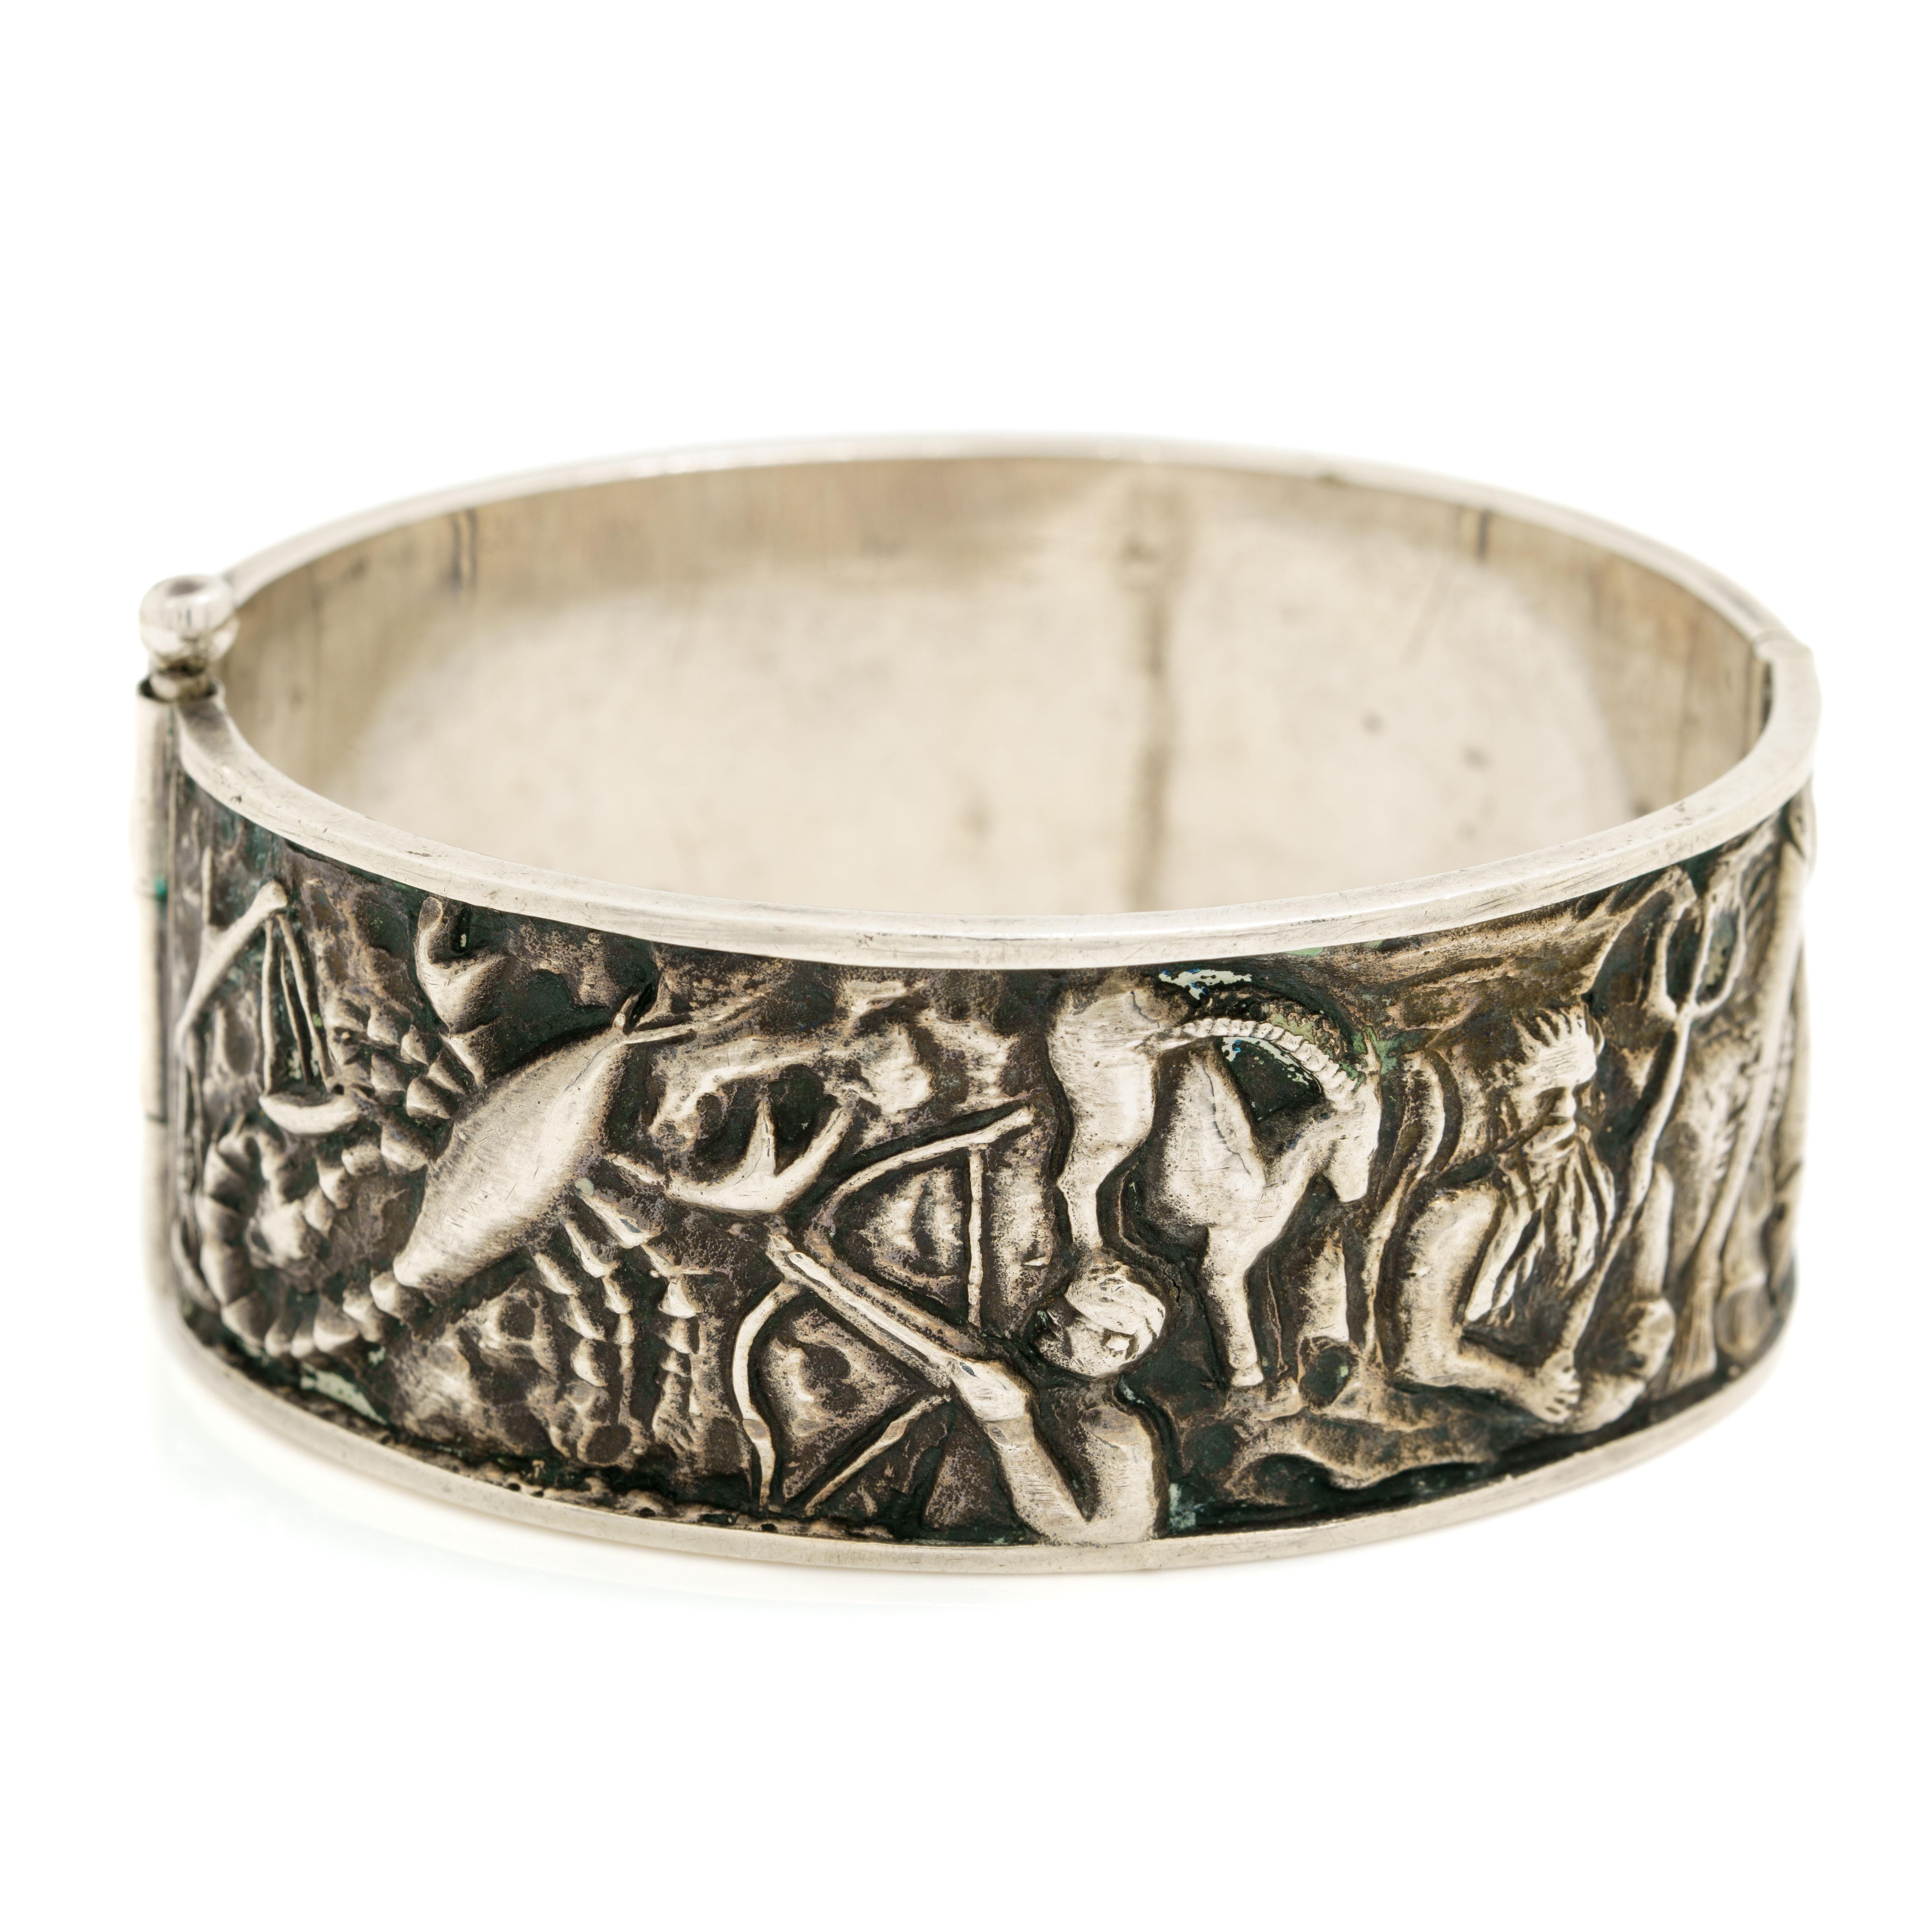 Antique Silver Etruscan Revival Astrological Zodiac Bangle
Solid, Heavy and an amazing statement bangle. Rare

81.45 grams
W: 66.75
H: 55.87
Depth:26.23

fits up to a 7.5 inch wrist.